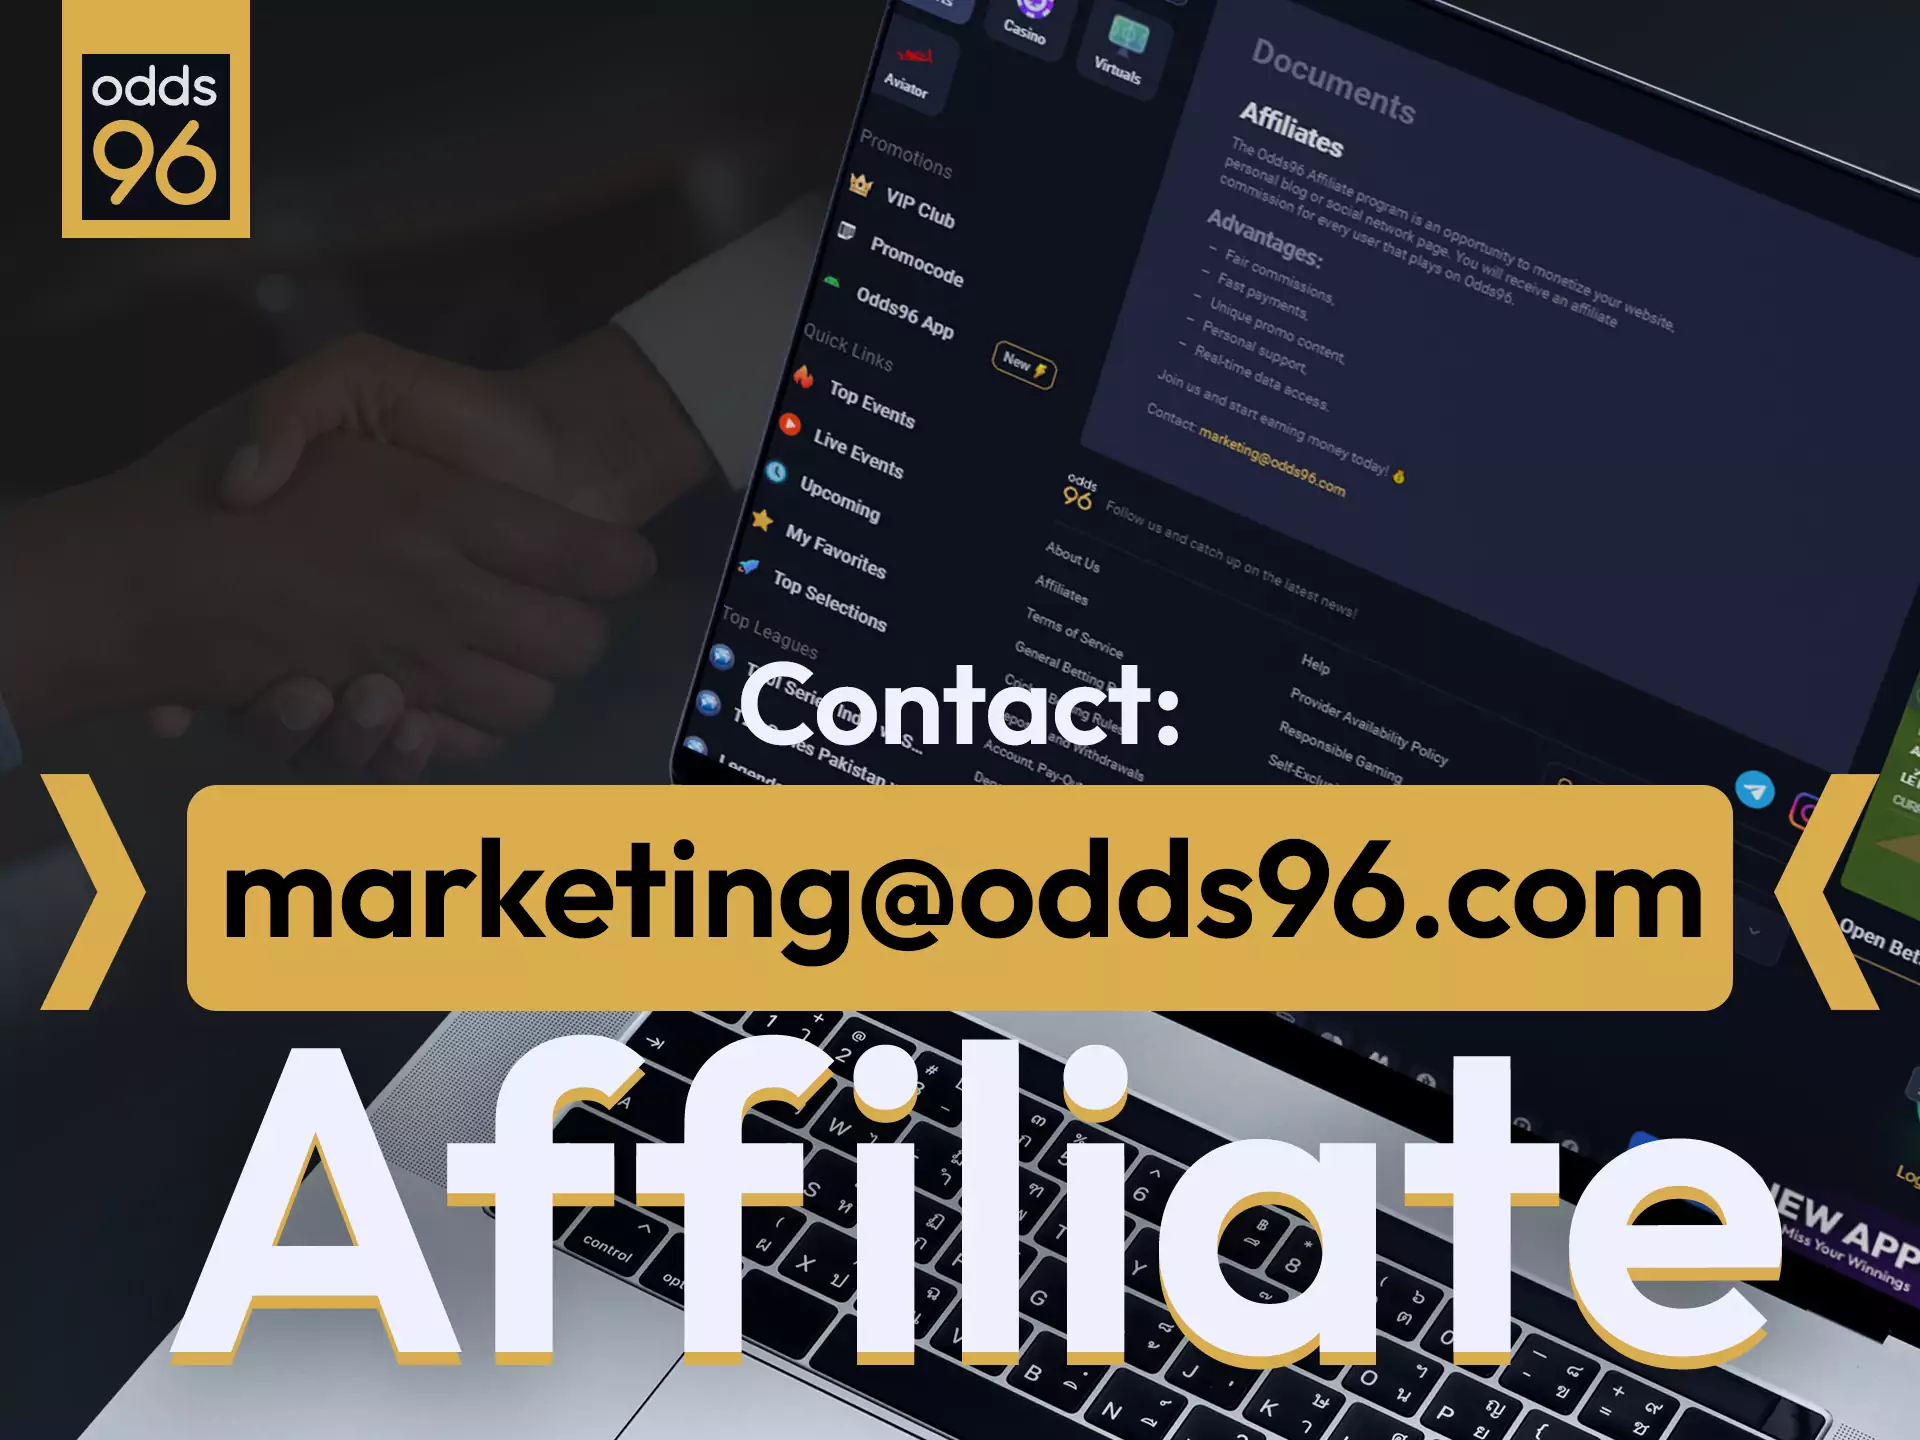 Become an Odds96 partner with the affiliate program.